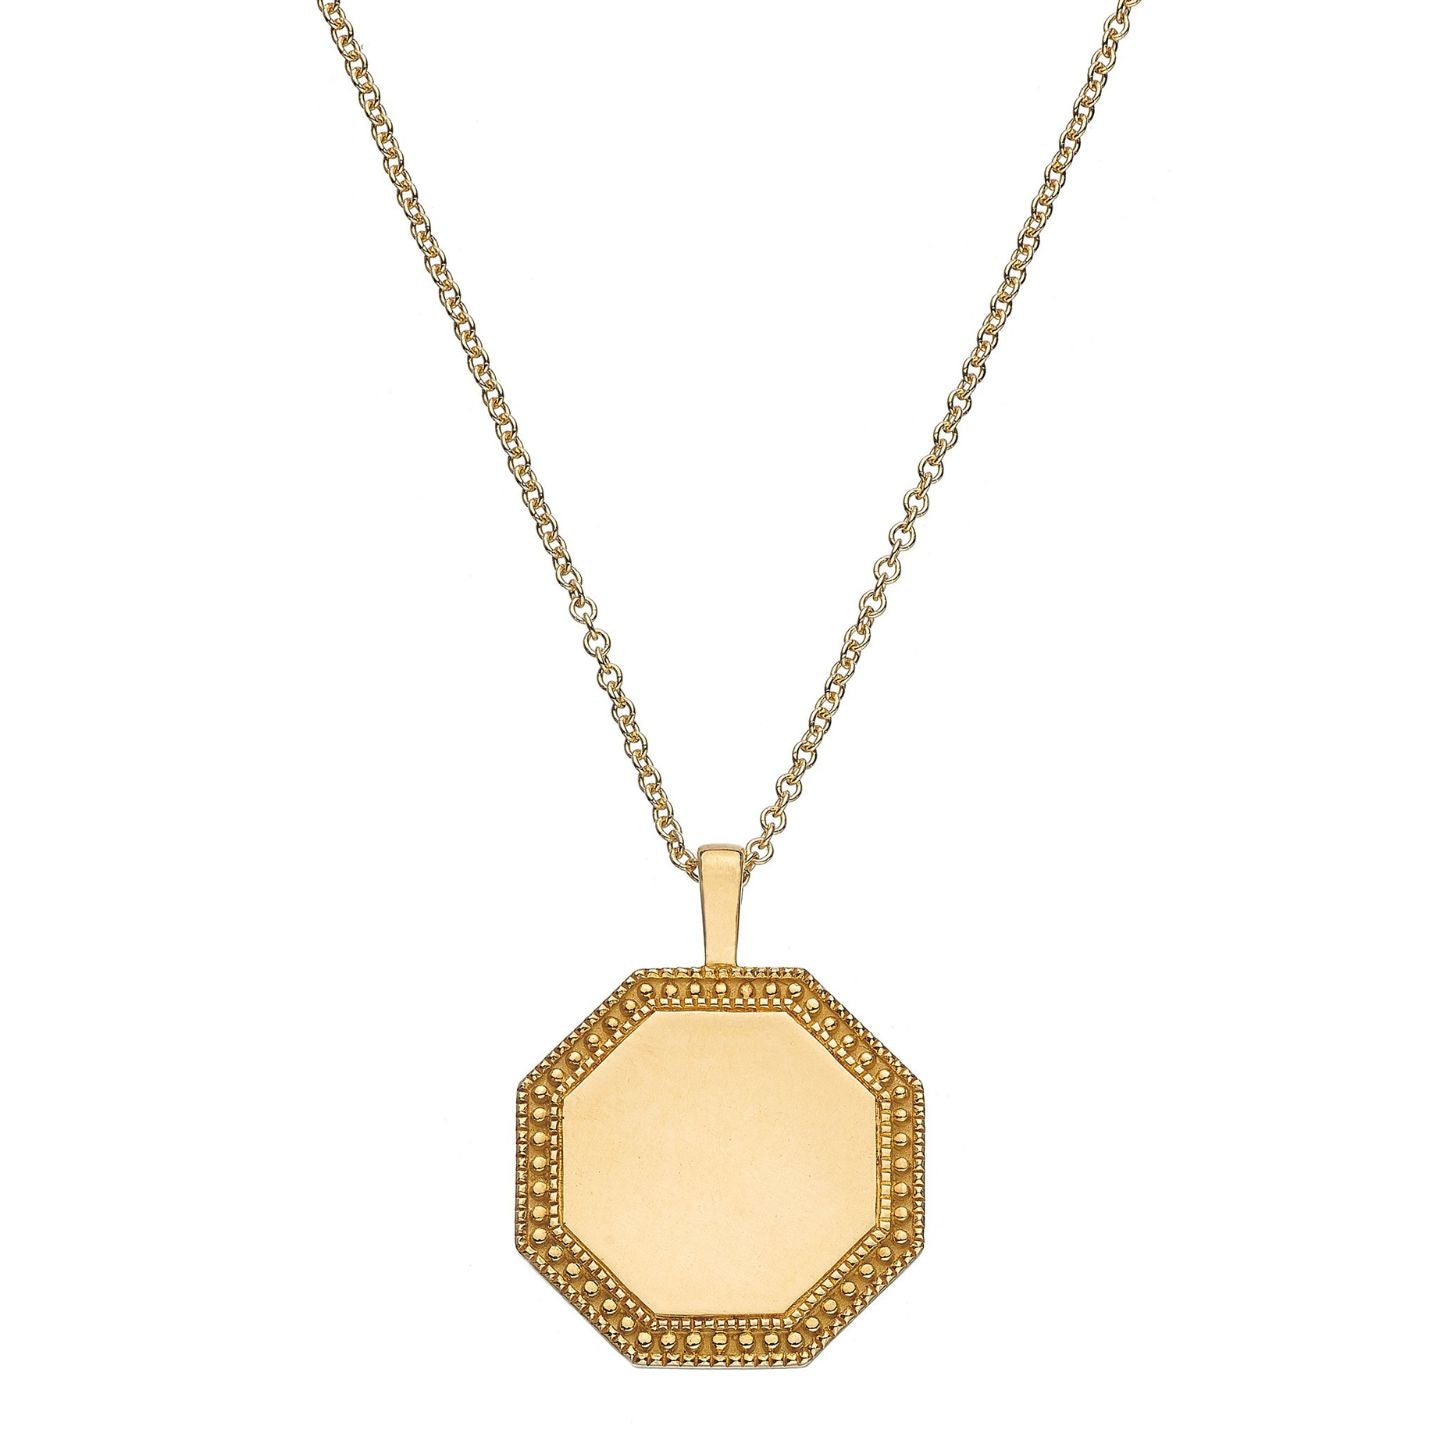 P.S. Soleil Yellow Gold Octagon Charm with Oval Link Chain